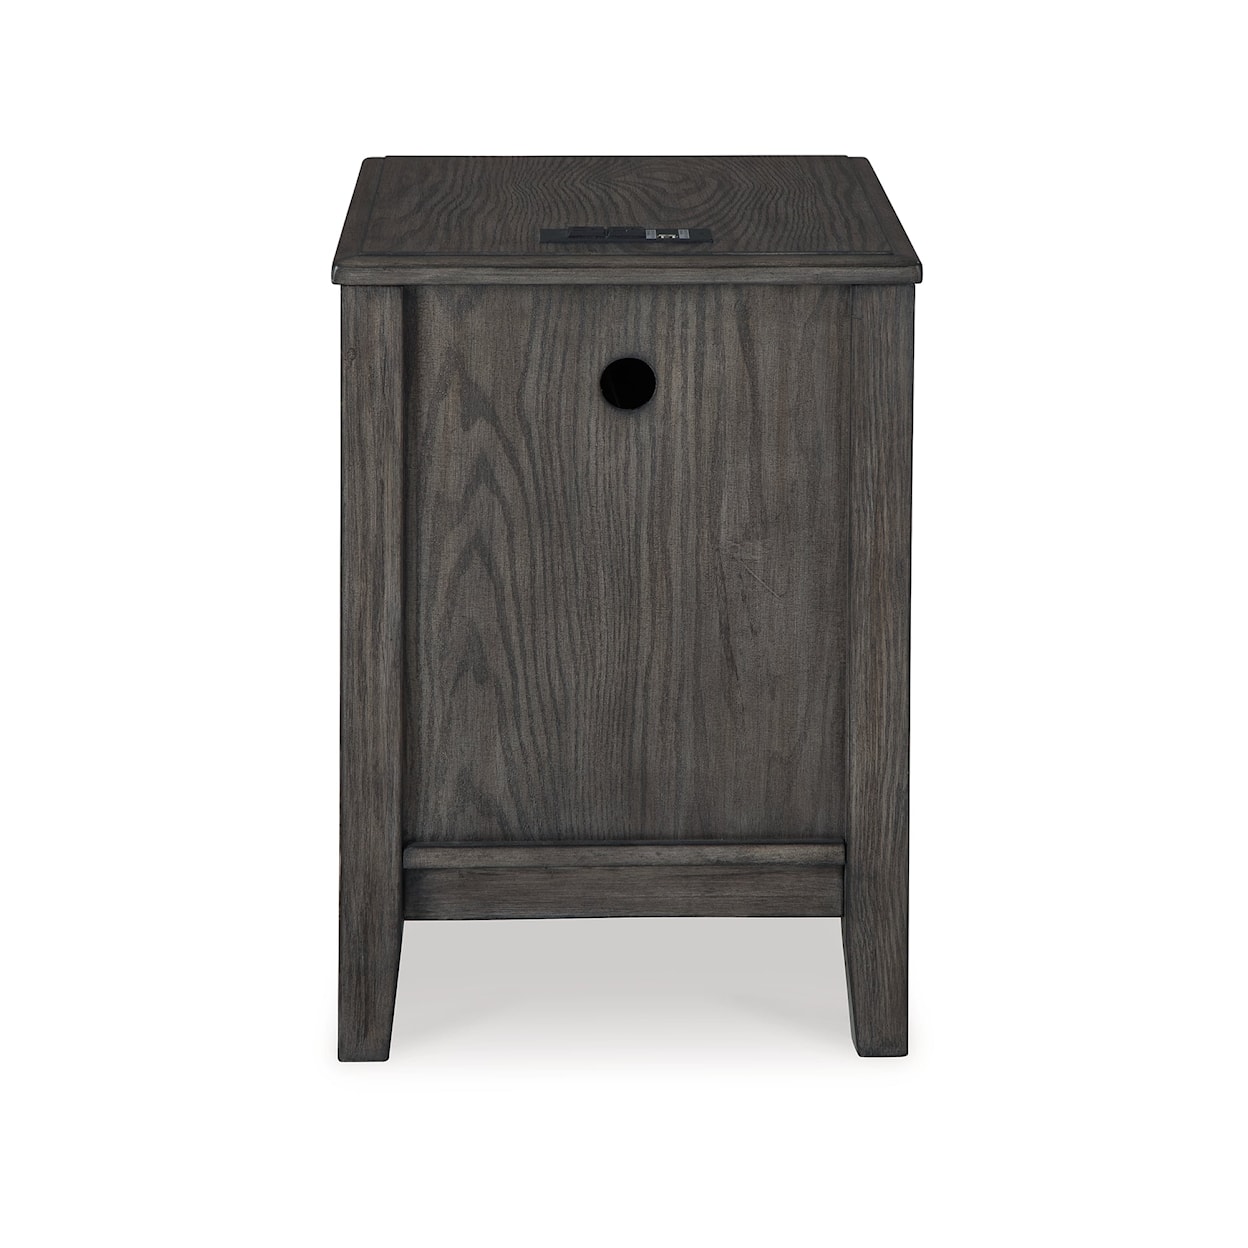 Benchcraft Montillan Chairside End Table